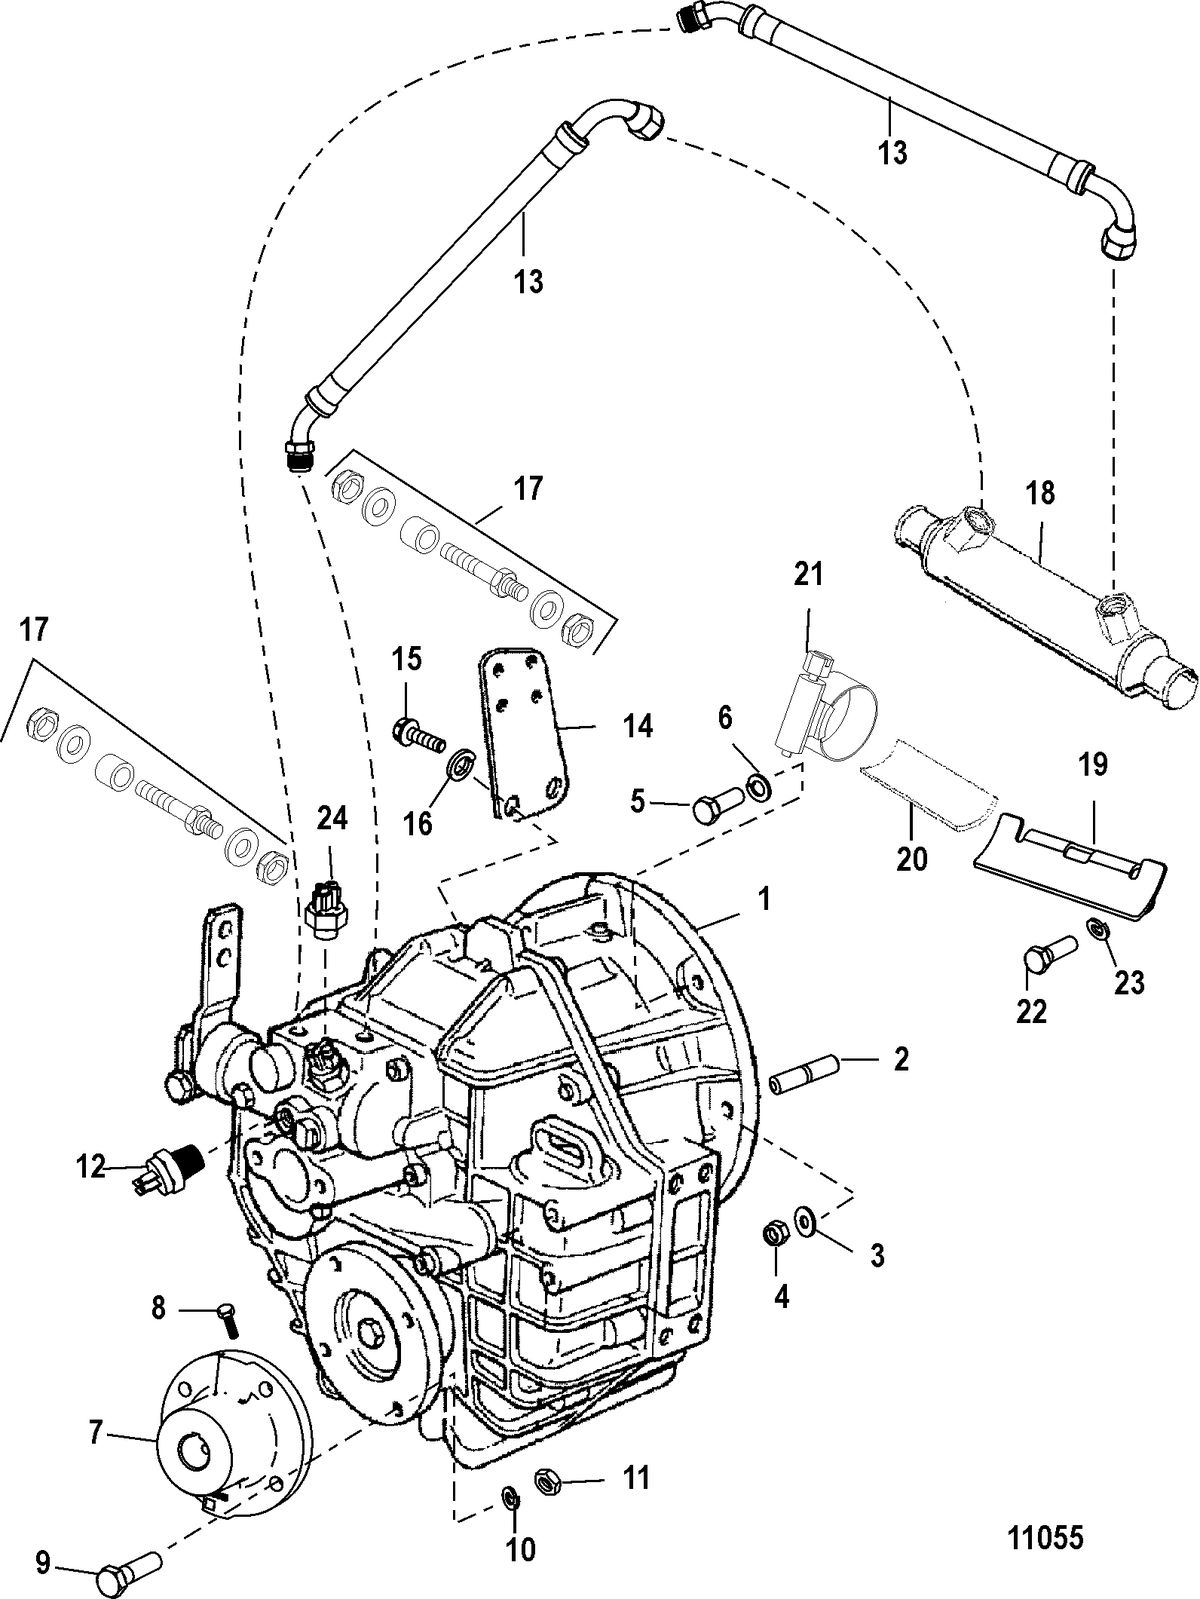 MERCRUISER 5.7L INBOARD Transmission and Related Parts(Hurth 630)